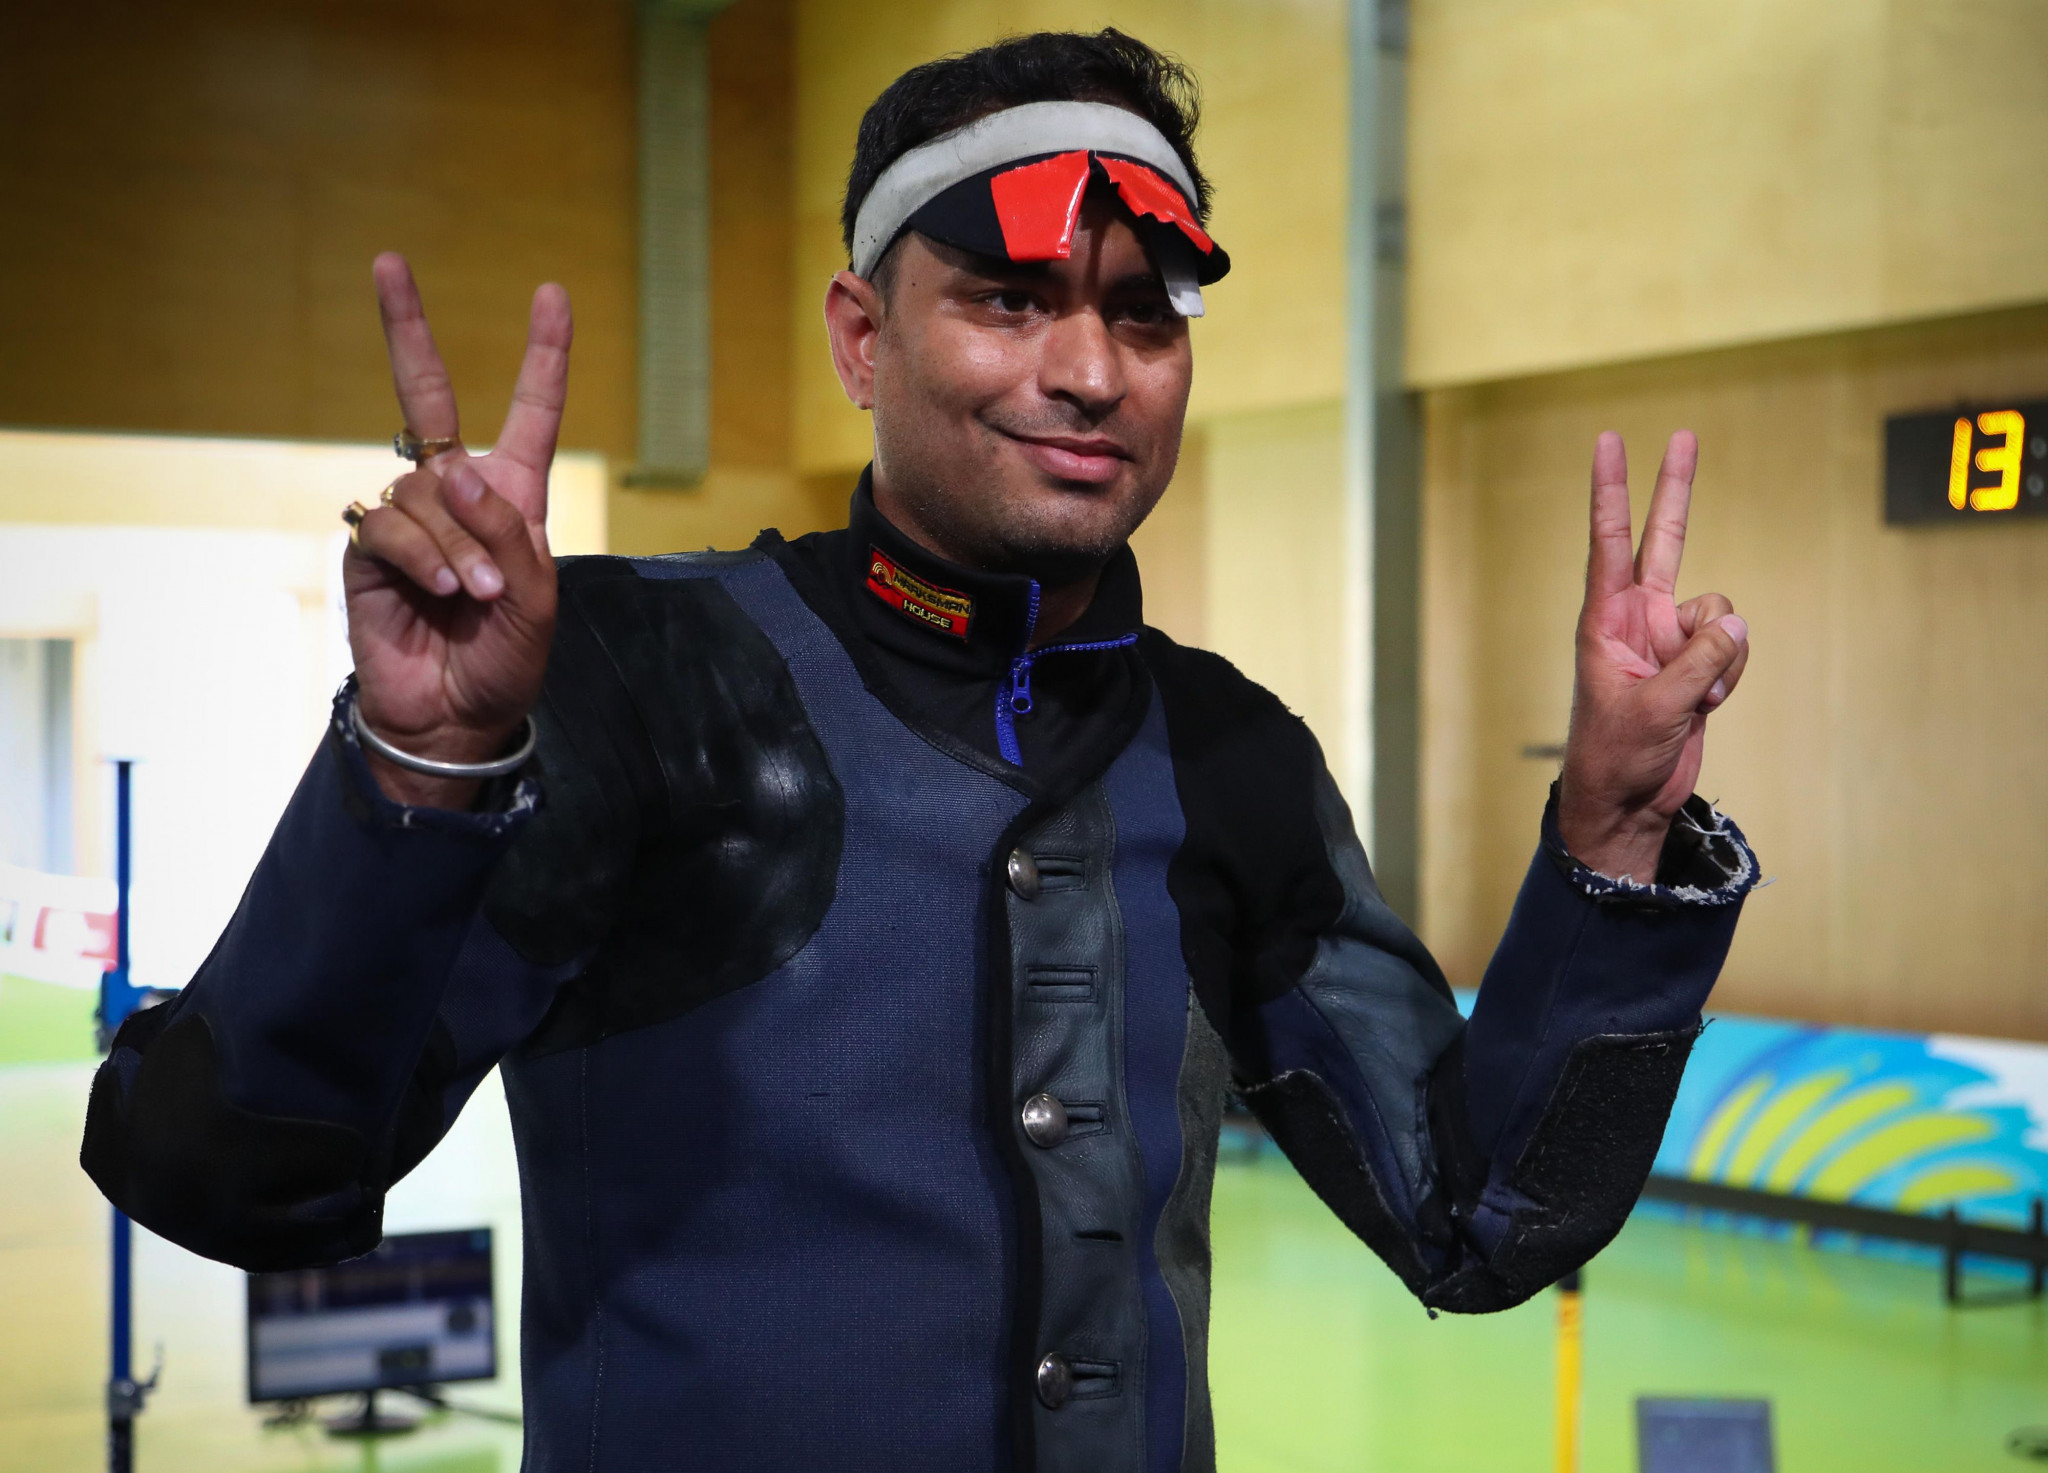 Rajput considers New Delhi ISSF World Cup a "test event" before Tokyo 2020